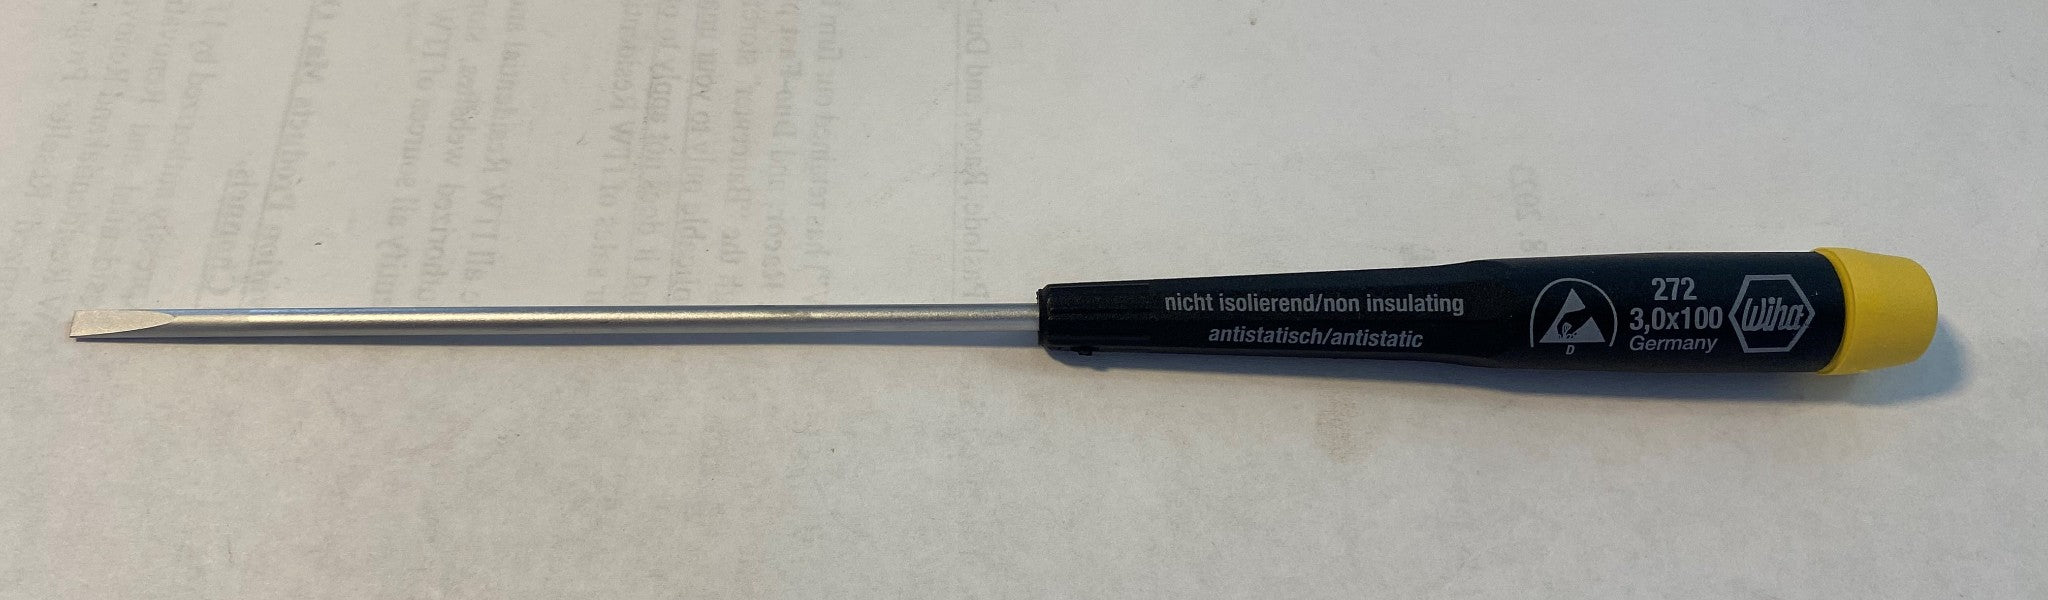 Wiha 27232 ESD Safe Precision Slotted Screwdriver 3.0 x 100mm Germany